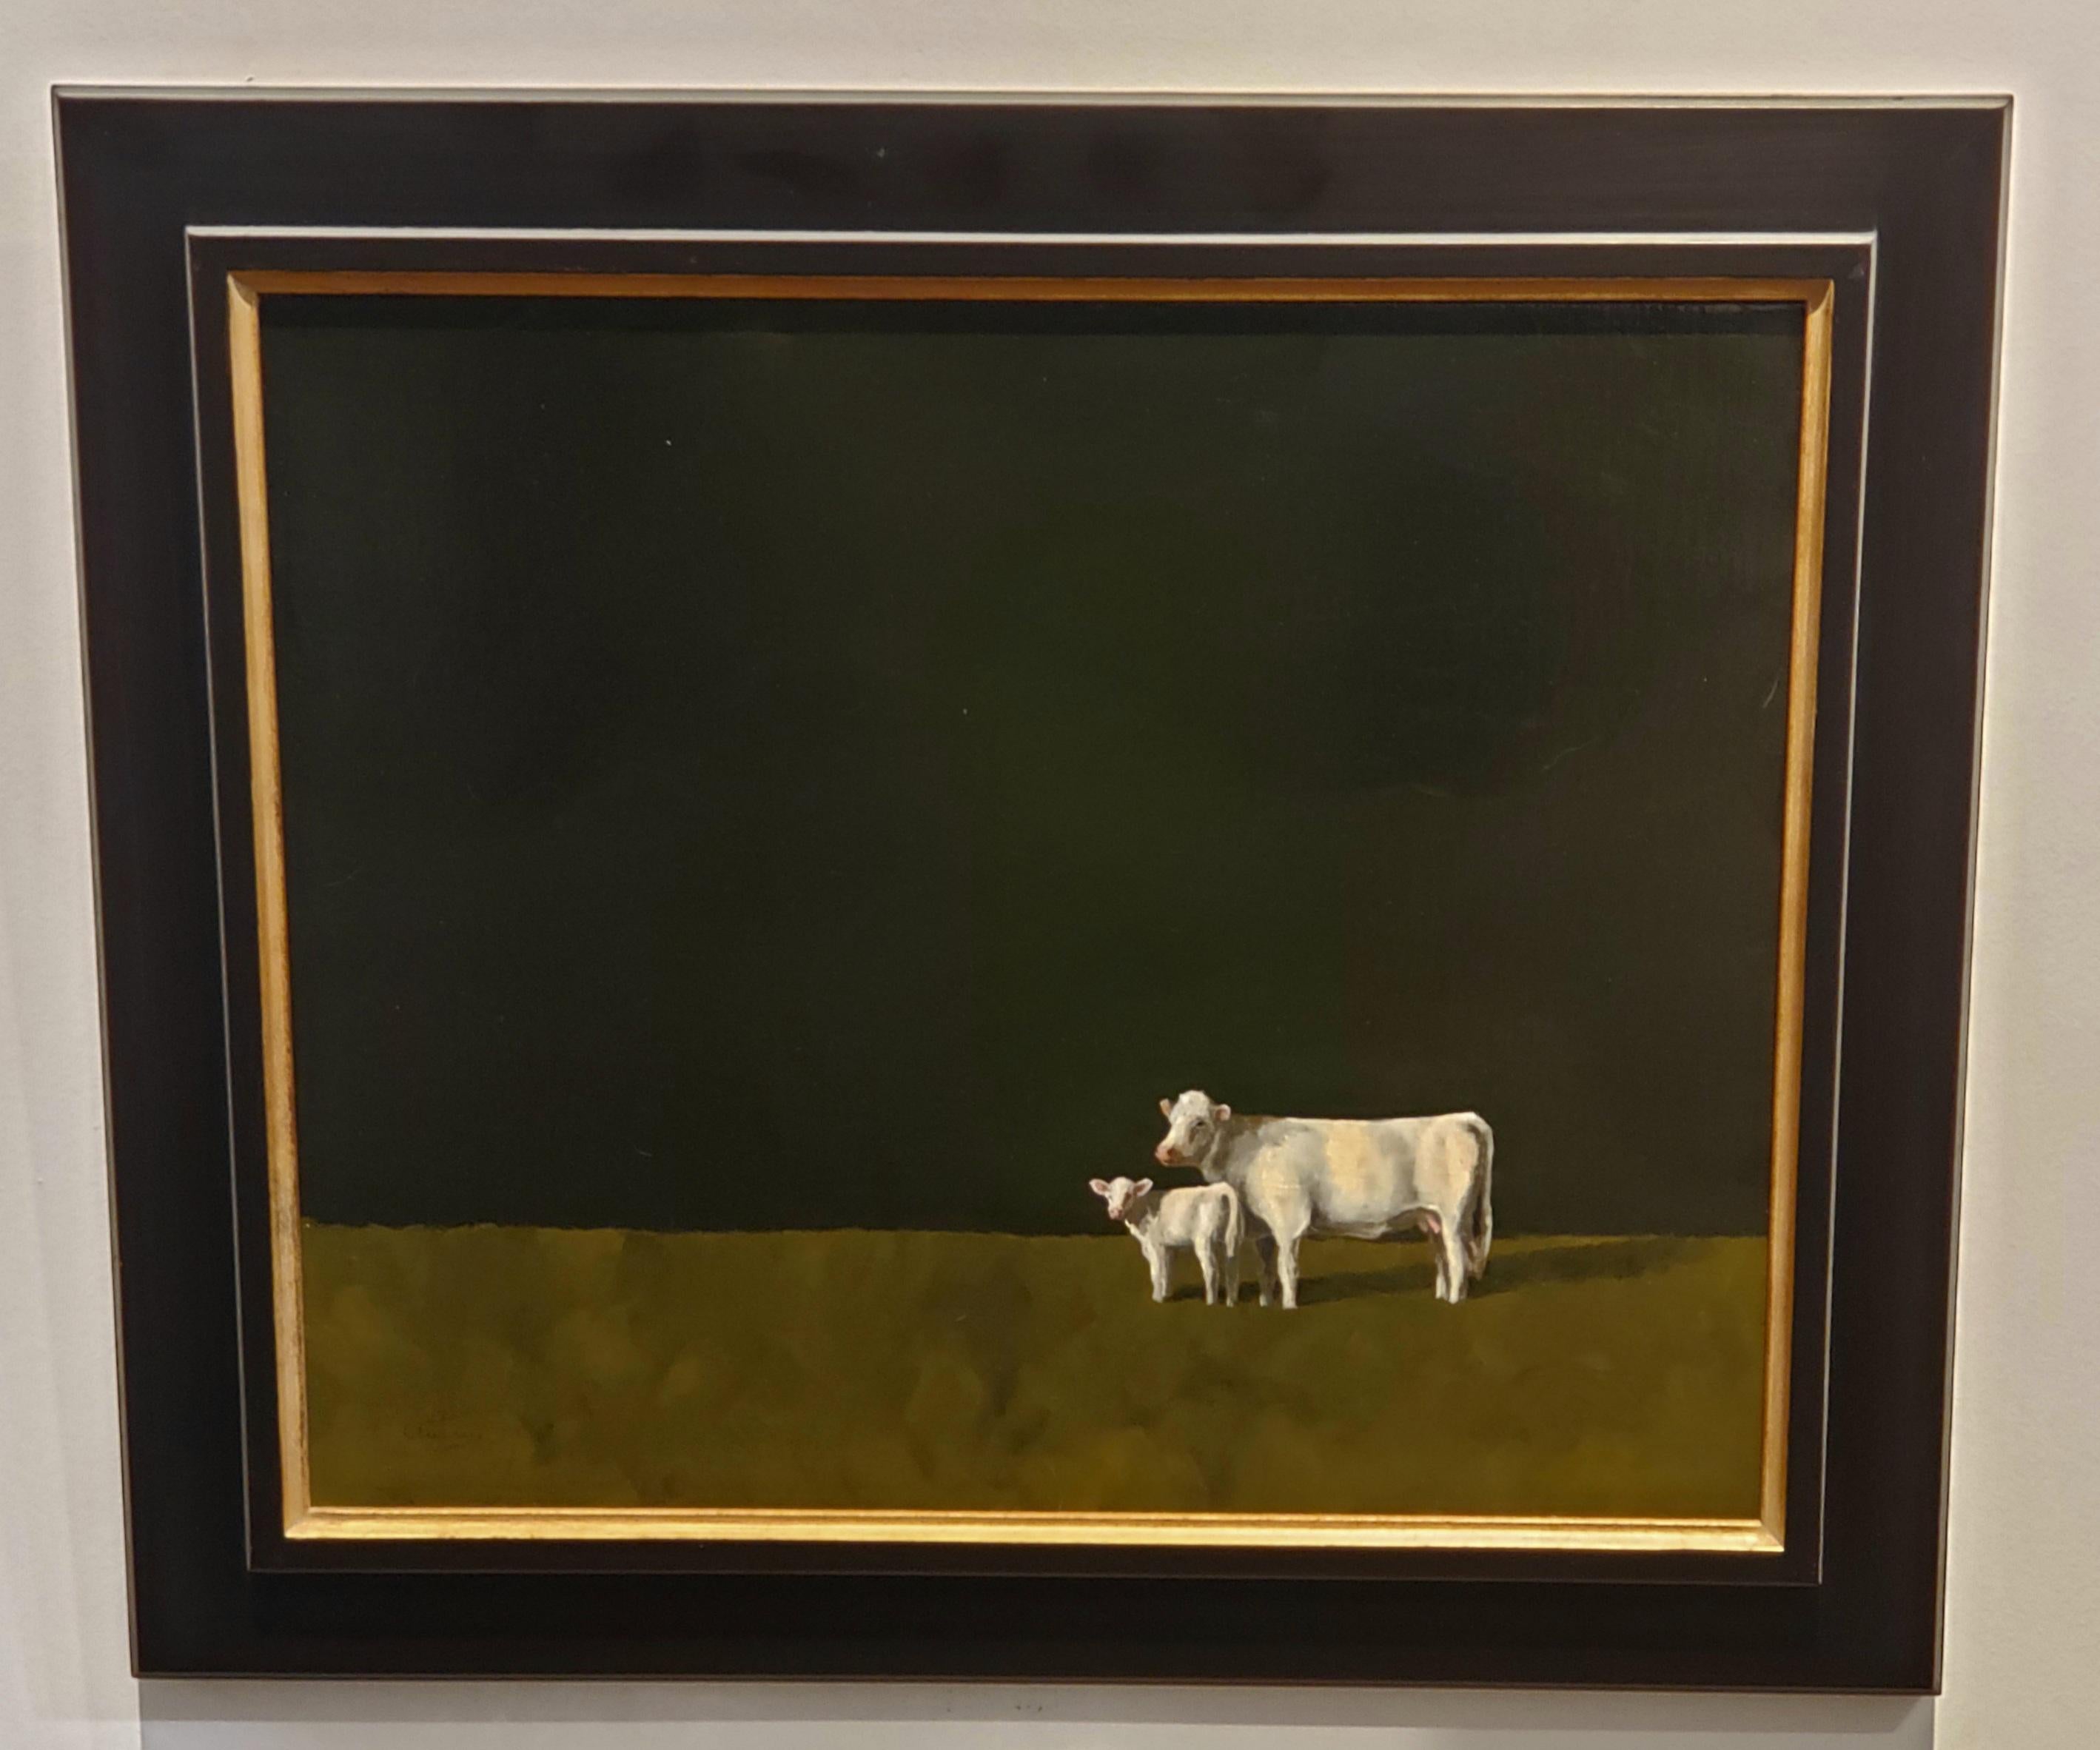 Ovejas Grandes, Livestock, Realism, Texas Artist,  Realist, Texas Ranch - Painting by Luke Autrey